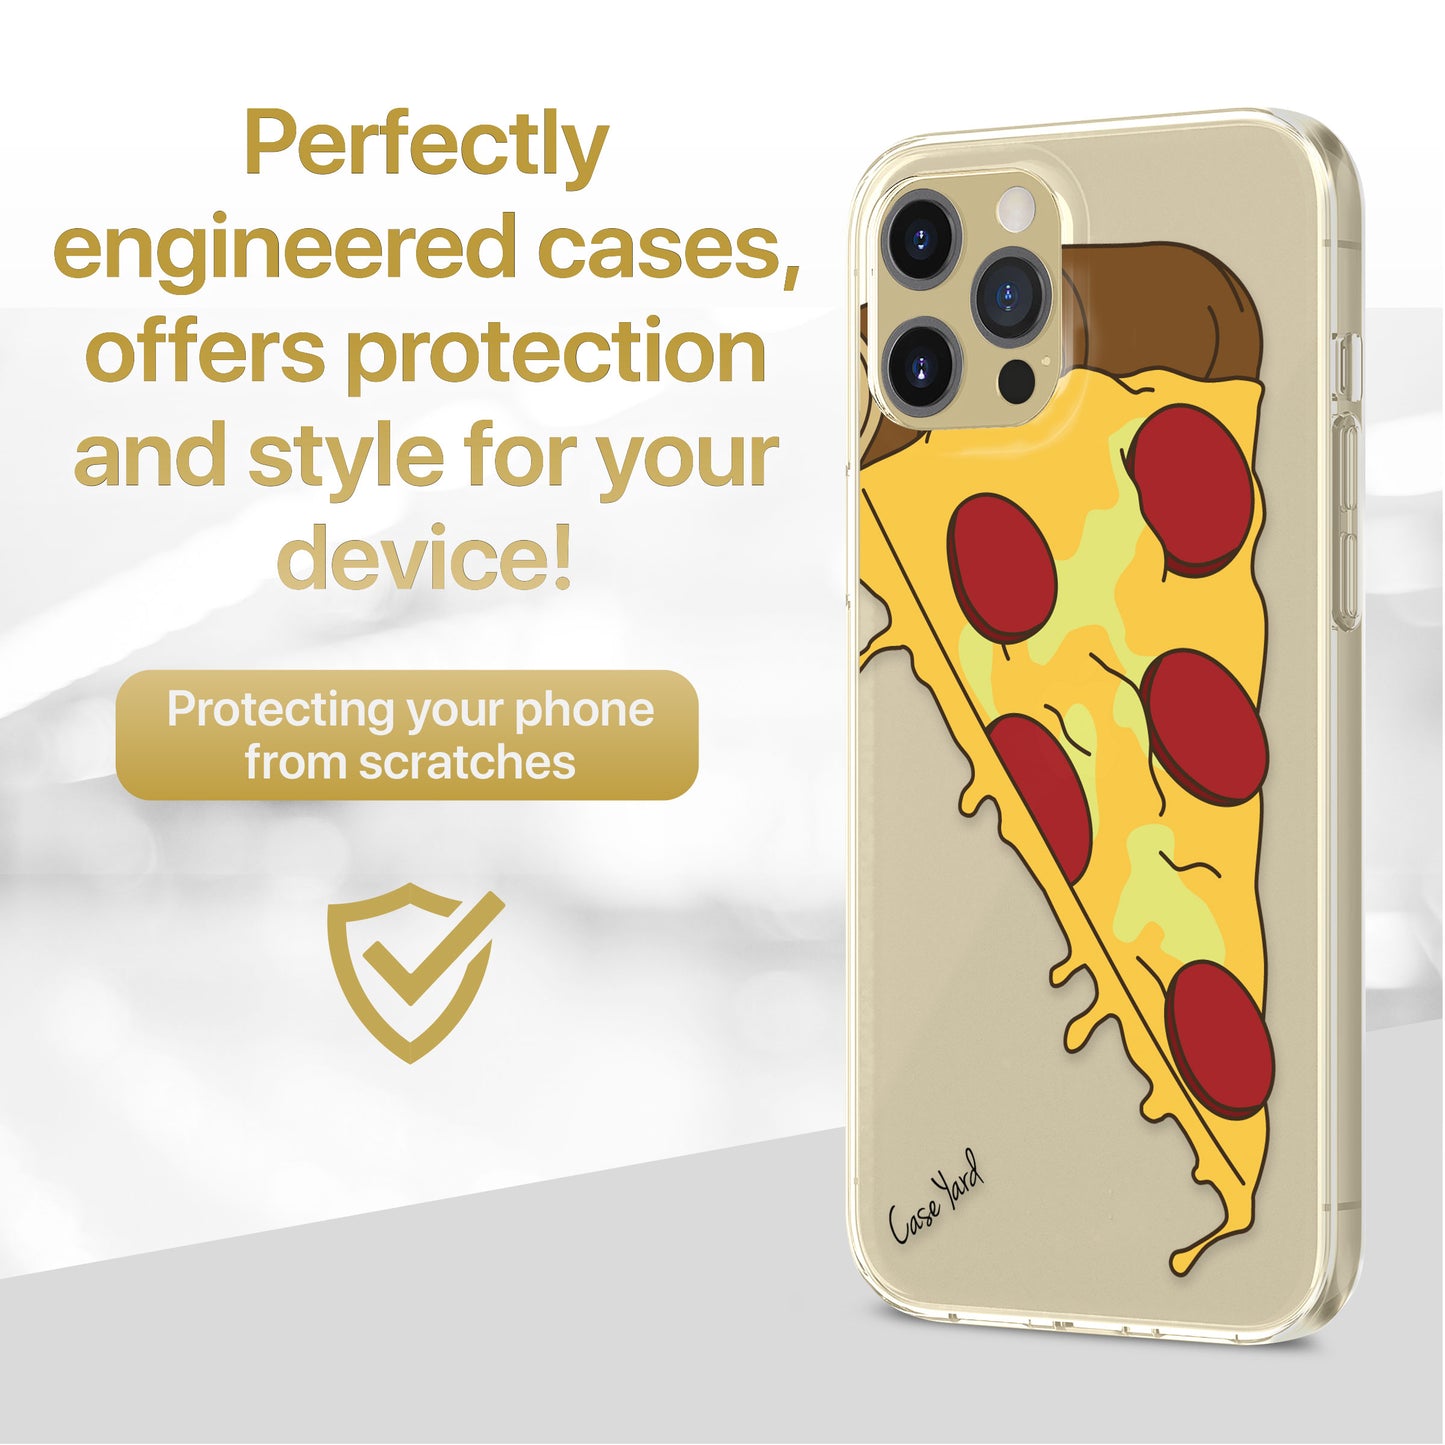 TPU Clear case with (Pizza Slice) Design for iPhone & Samsung Phones